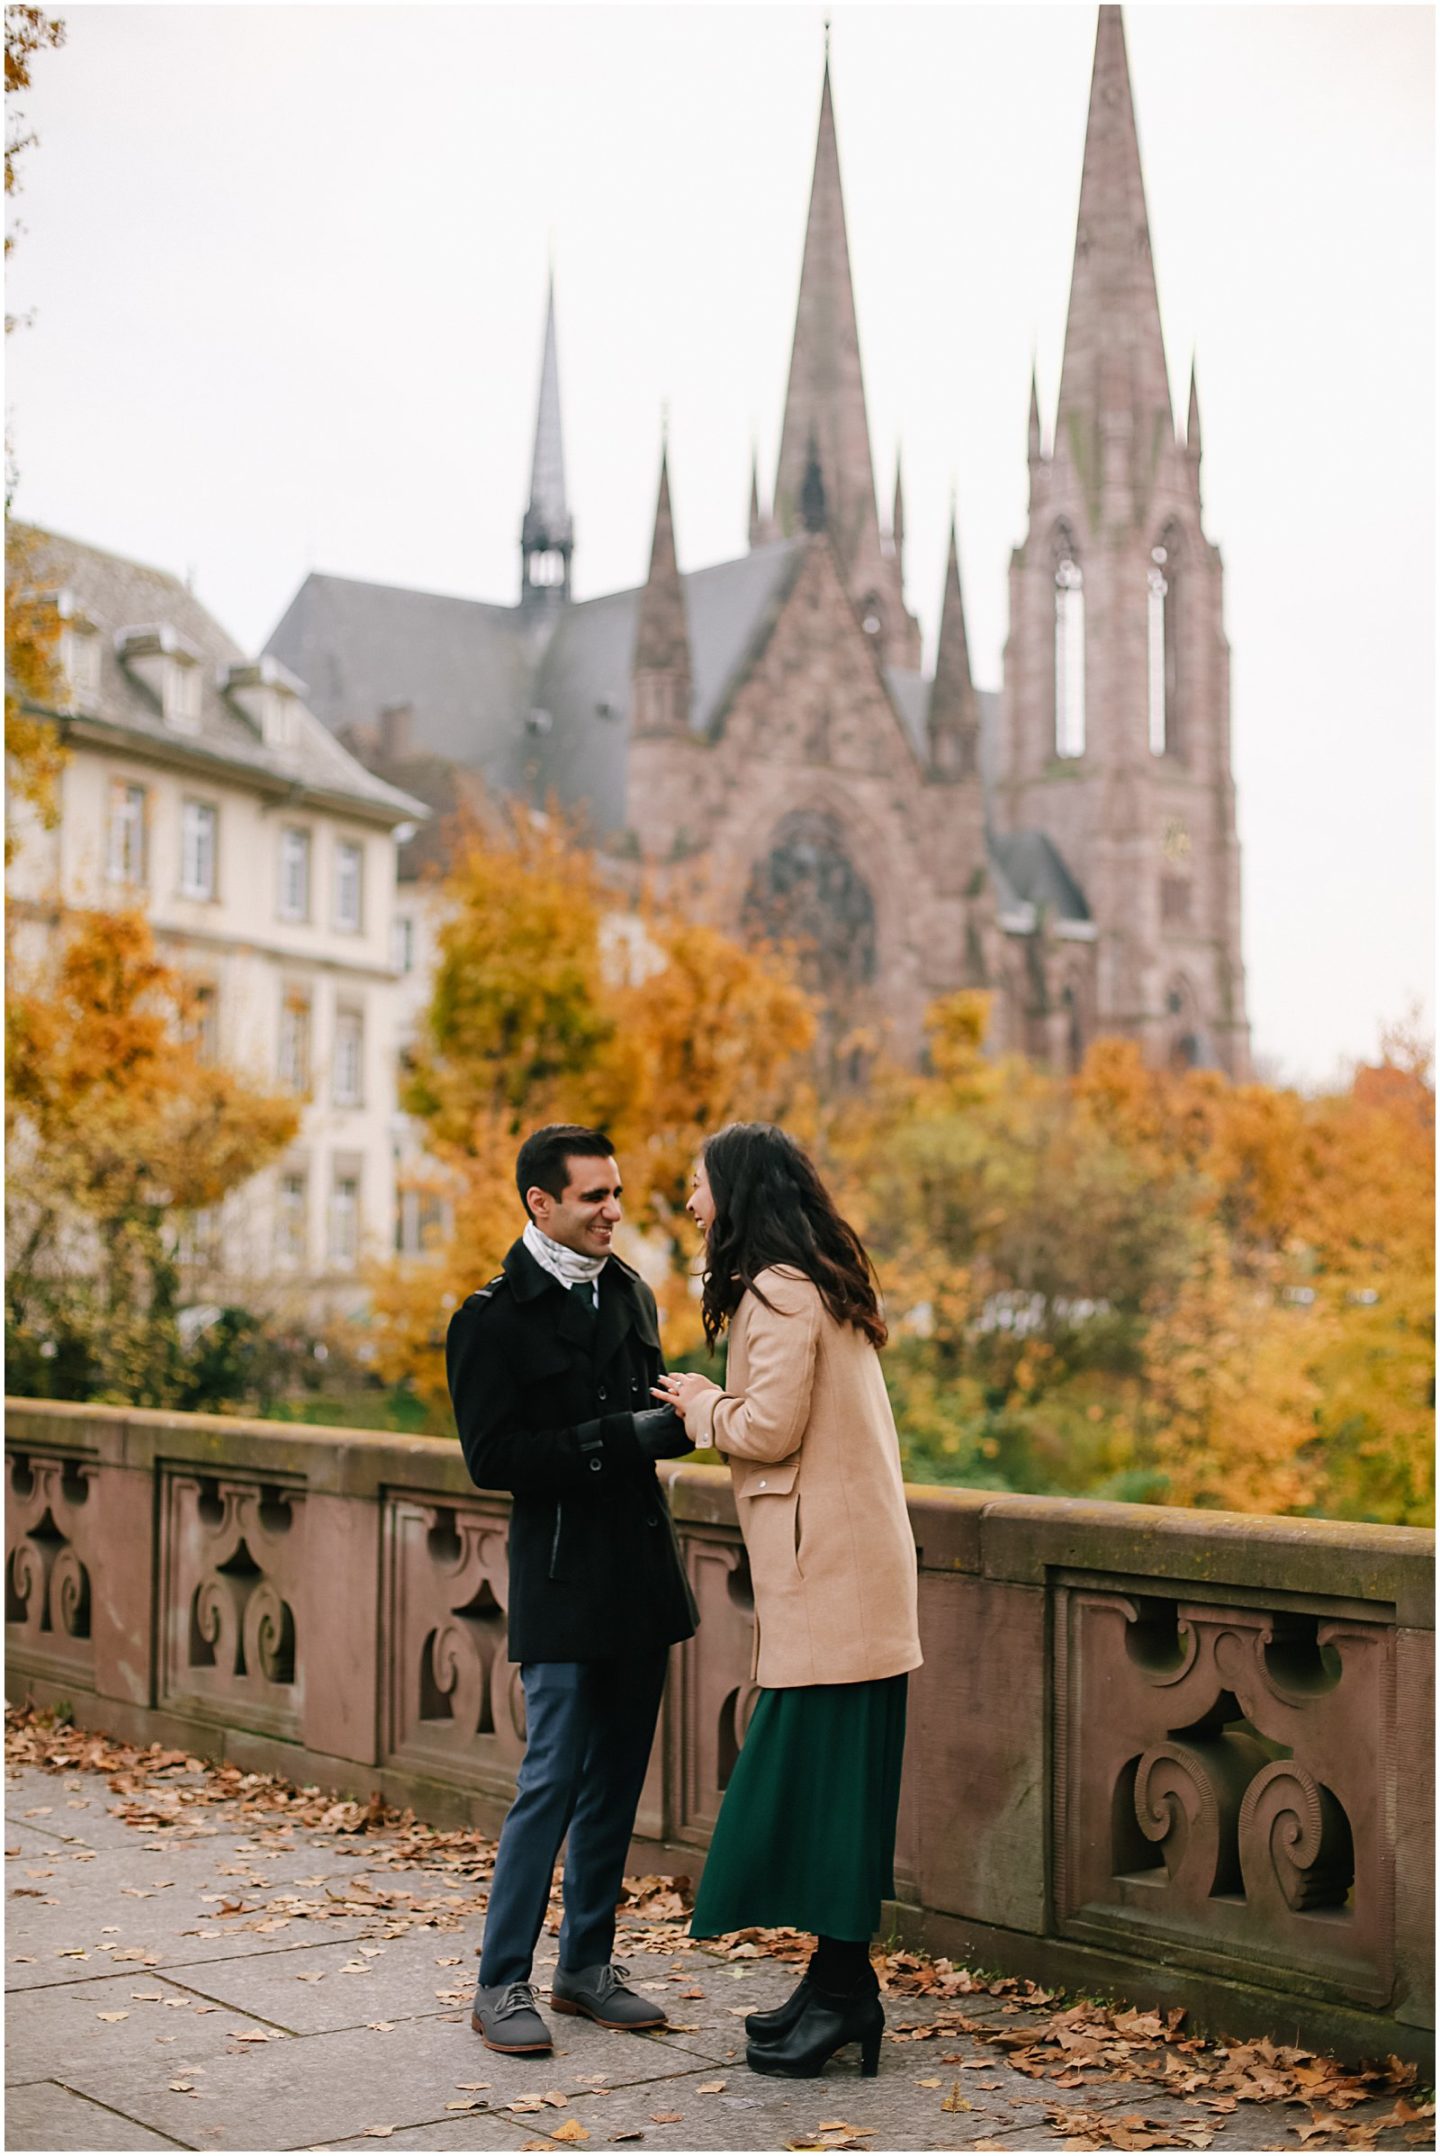 surprise engagement proposal at Saint Paul's Church in Strasbourg France